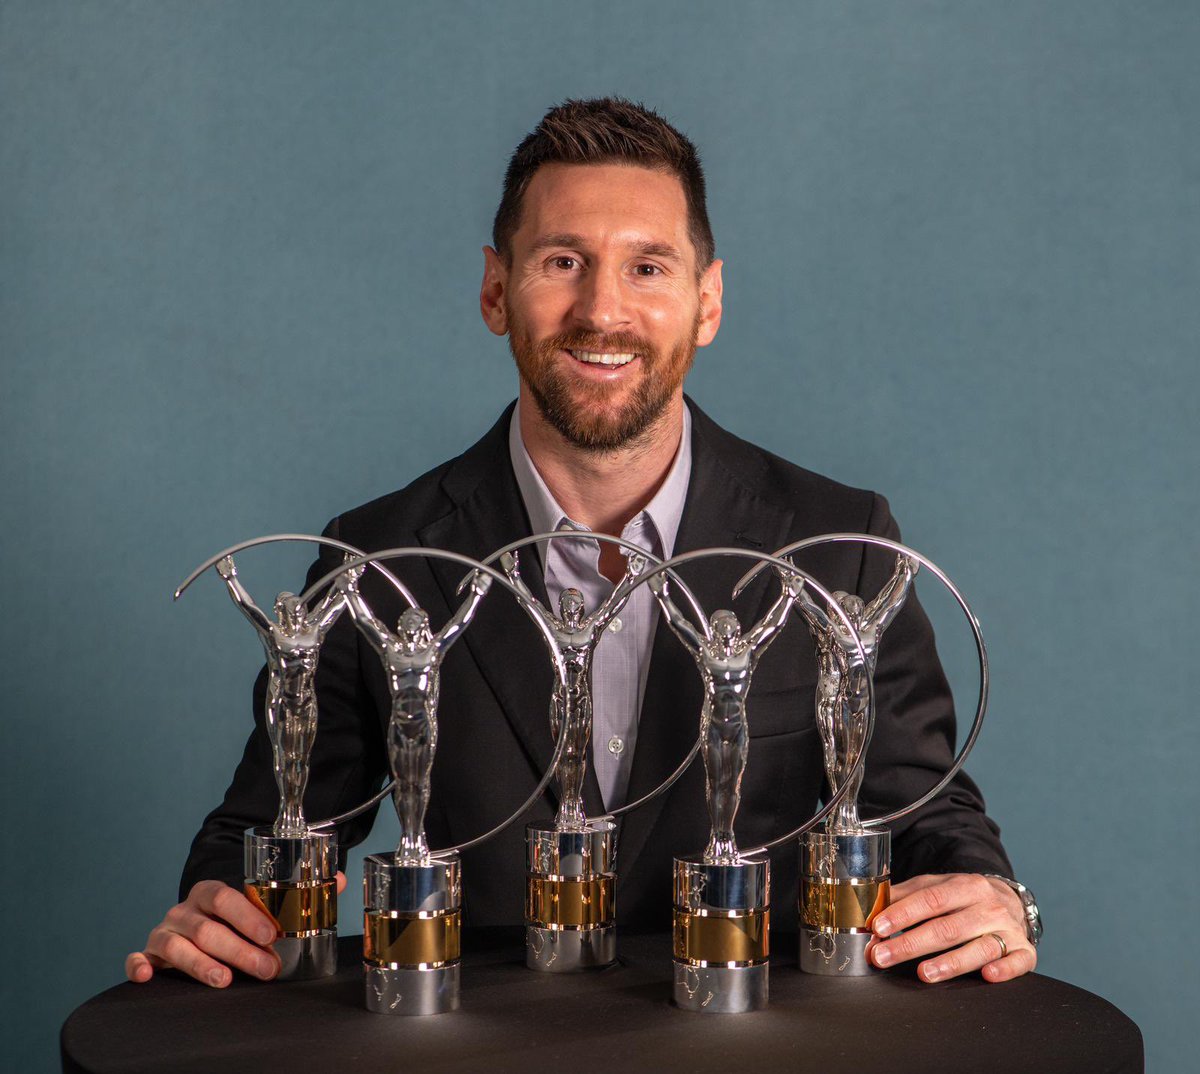 After a very special night in Paris, Lionel Messi celebrates an historic achievement as the first athlete to take home both the Laureus World Sportsman and Laureus World Team of the Year Awards in the same year at the Laureus World Sports Awards 🏆

#Laureus23